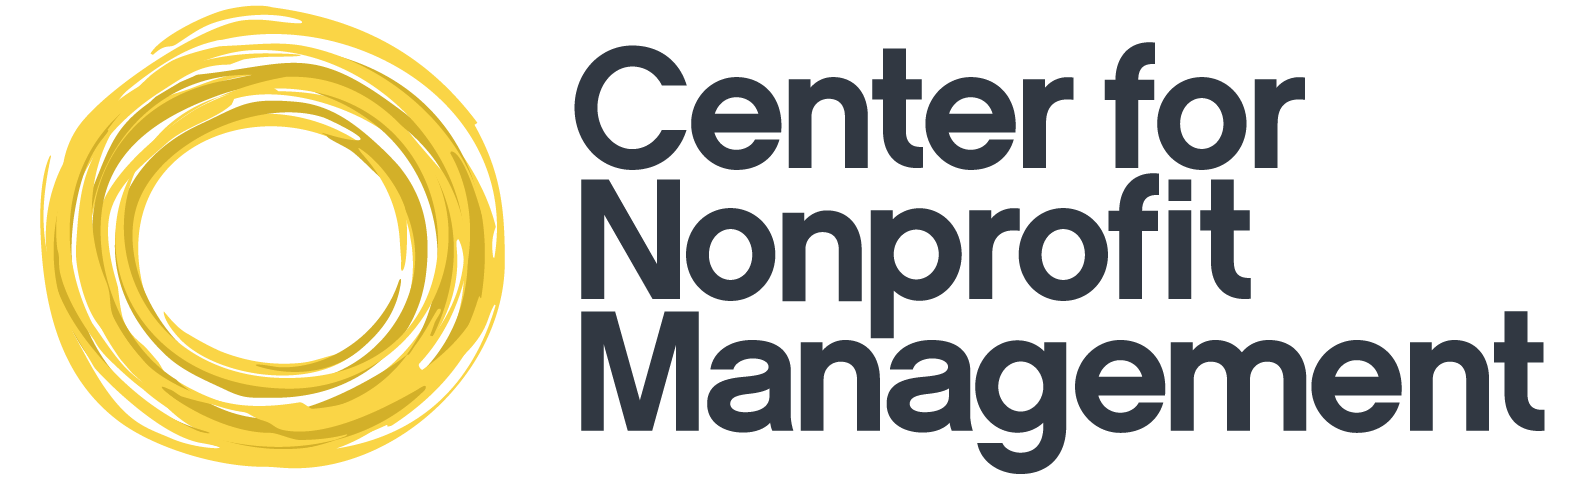 Center for Nonprofit Management - Southern California